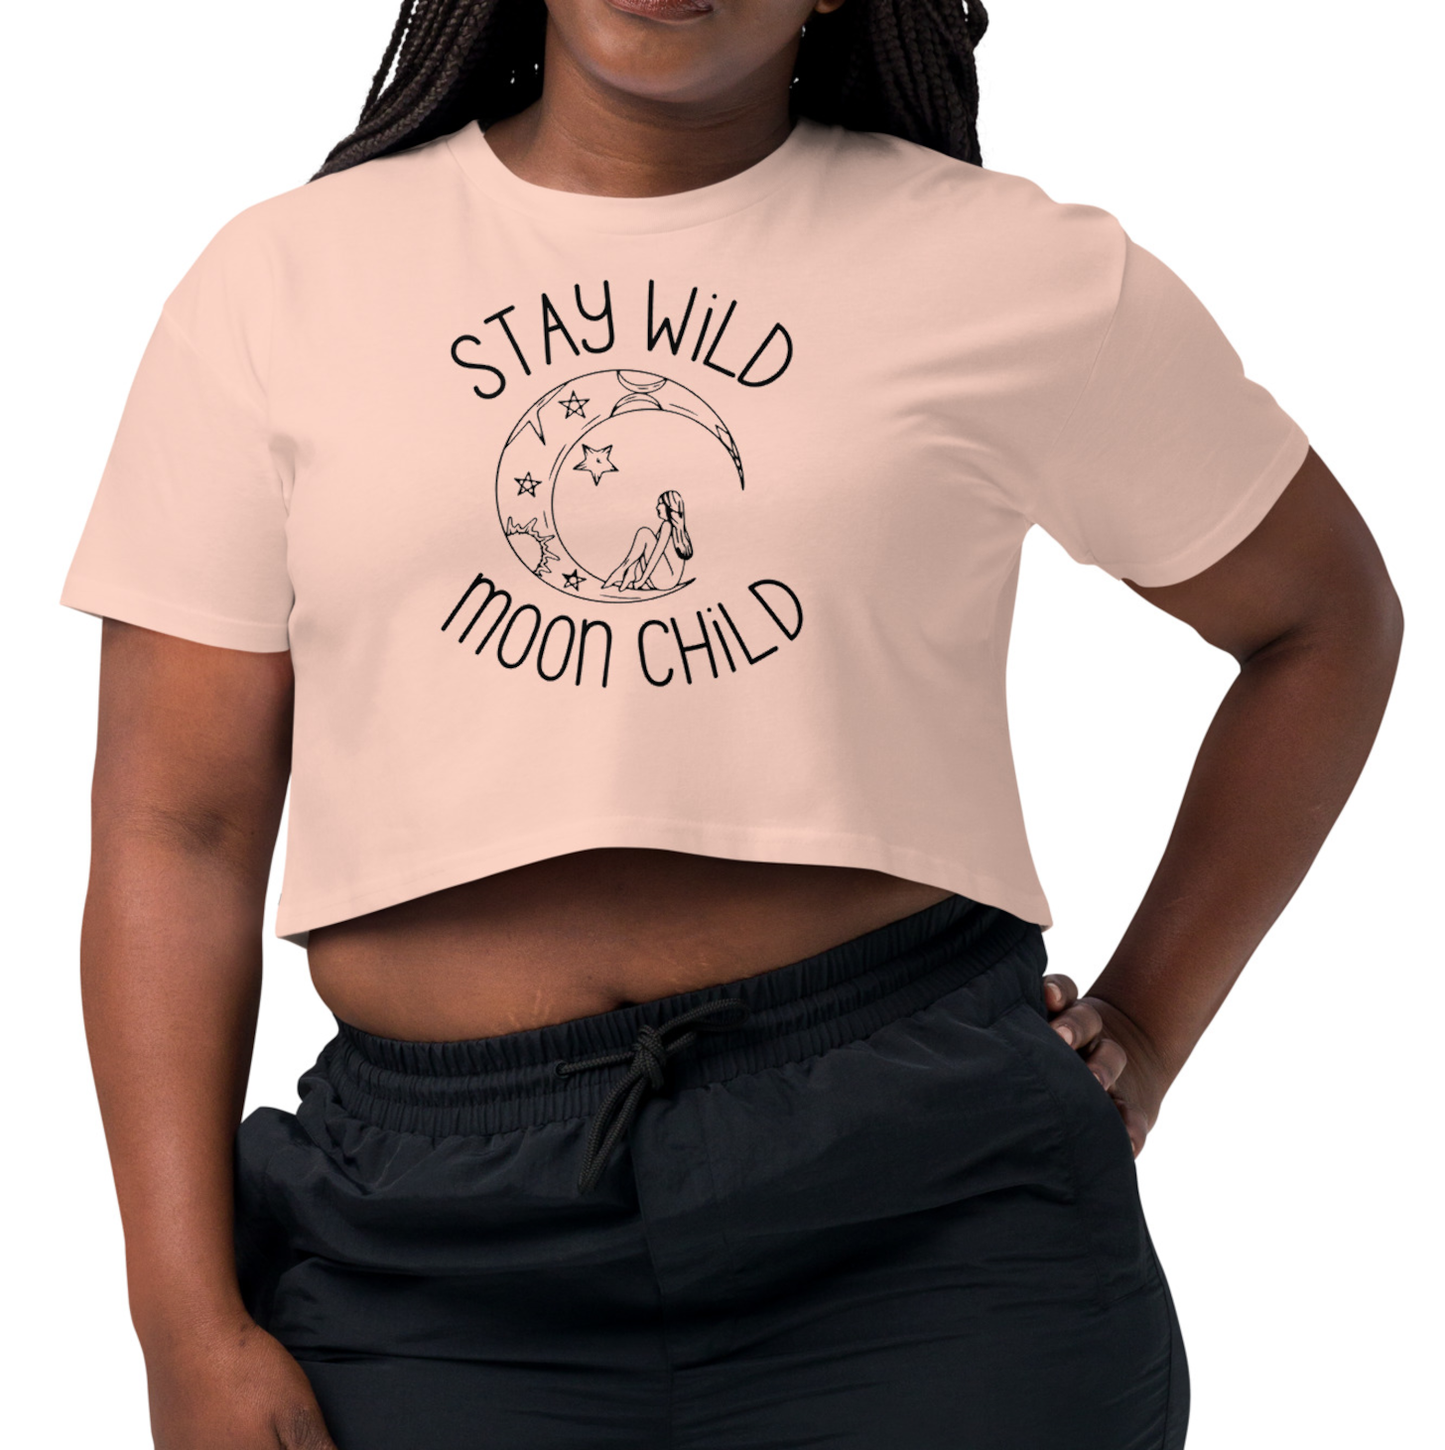 stay wild moon child cropped shirt